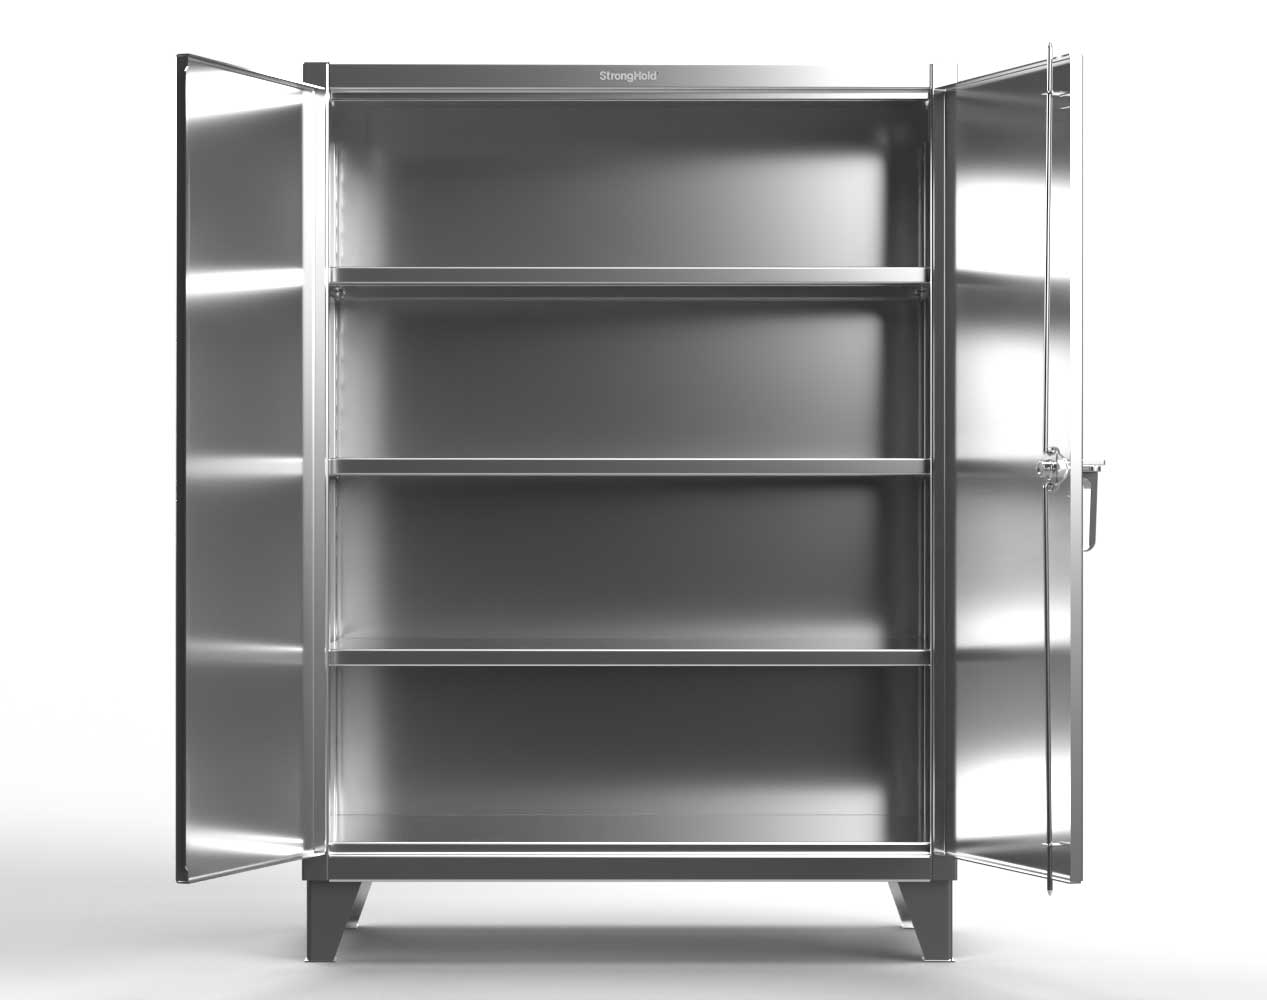 Extreme Duty 12 GA Stainless Steel Cabinet with 3 Shelves - 36 In. W x 24 In. D x 66 In. H